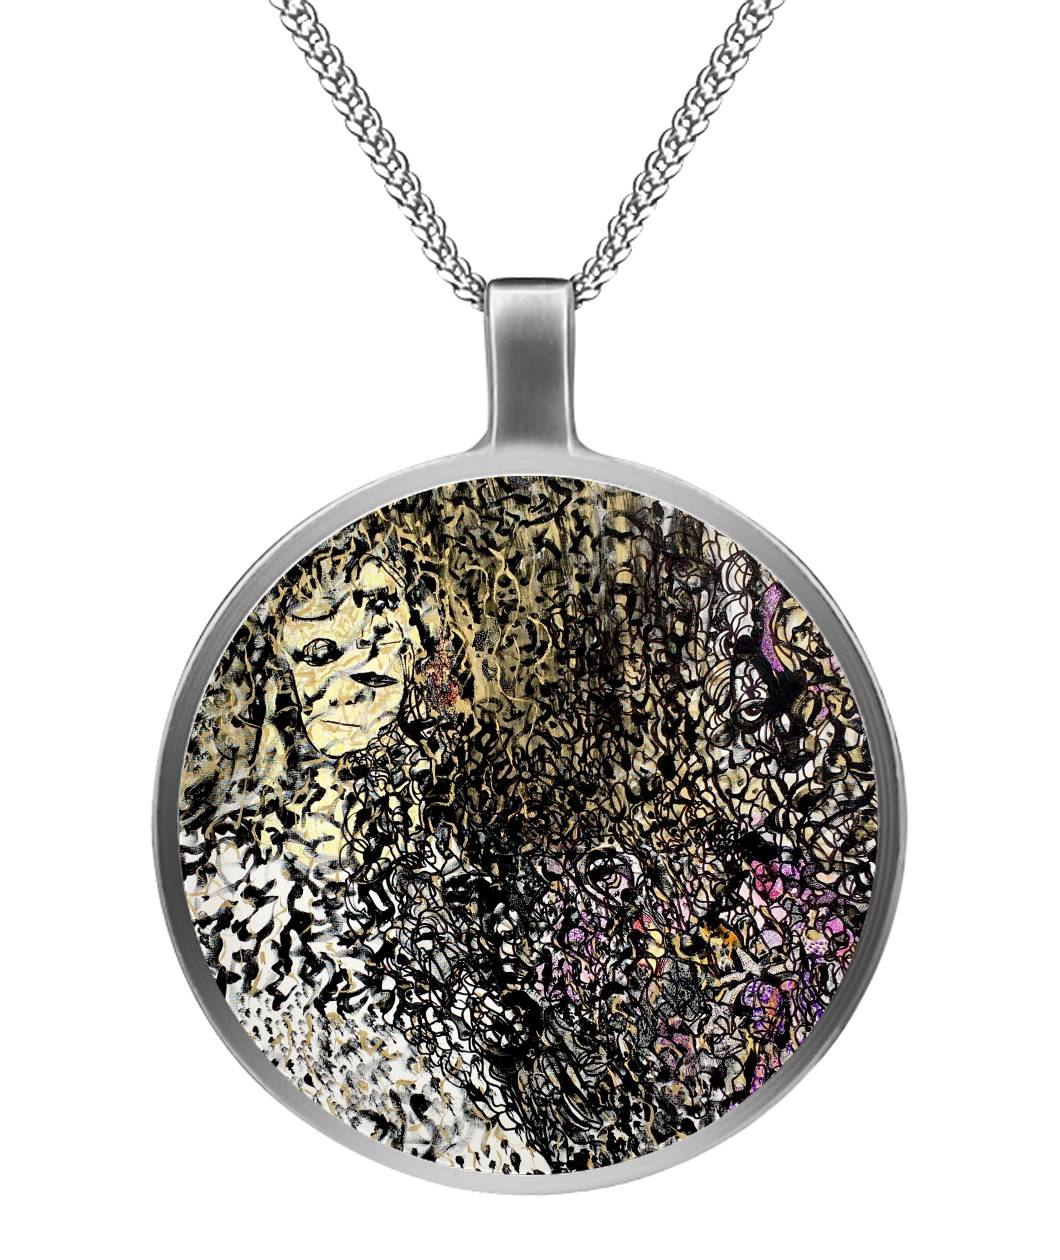 WALKING THROUGH THE VALLEY | Pendant Necklace